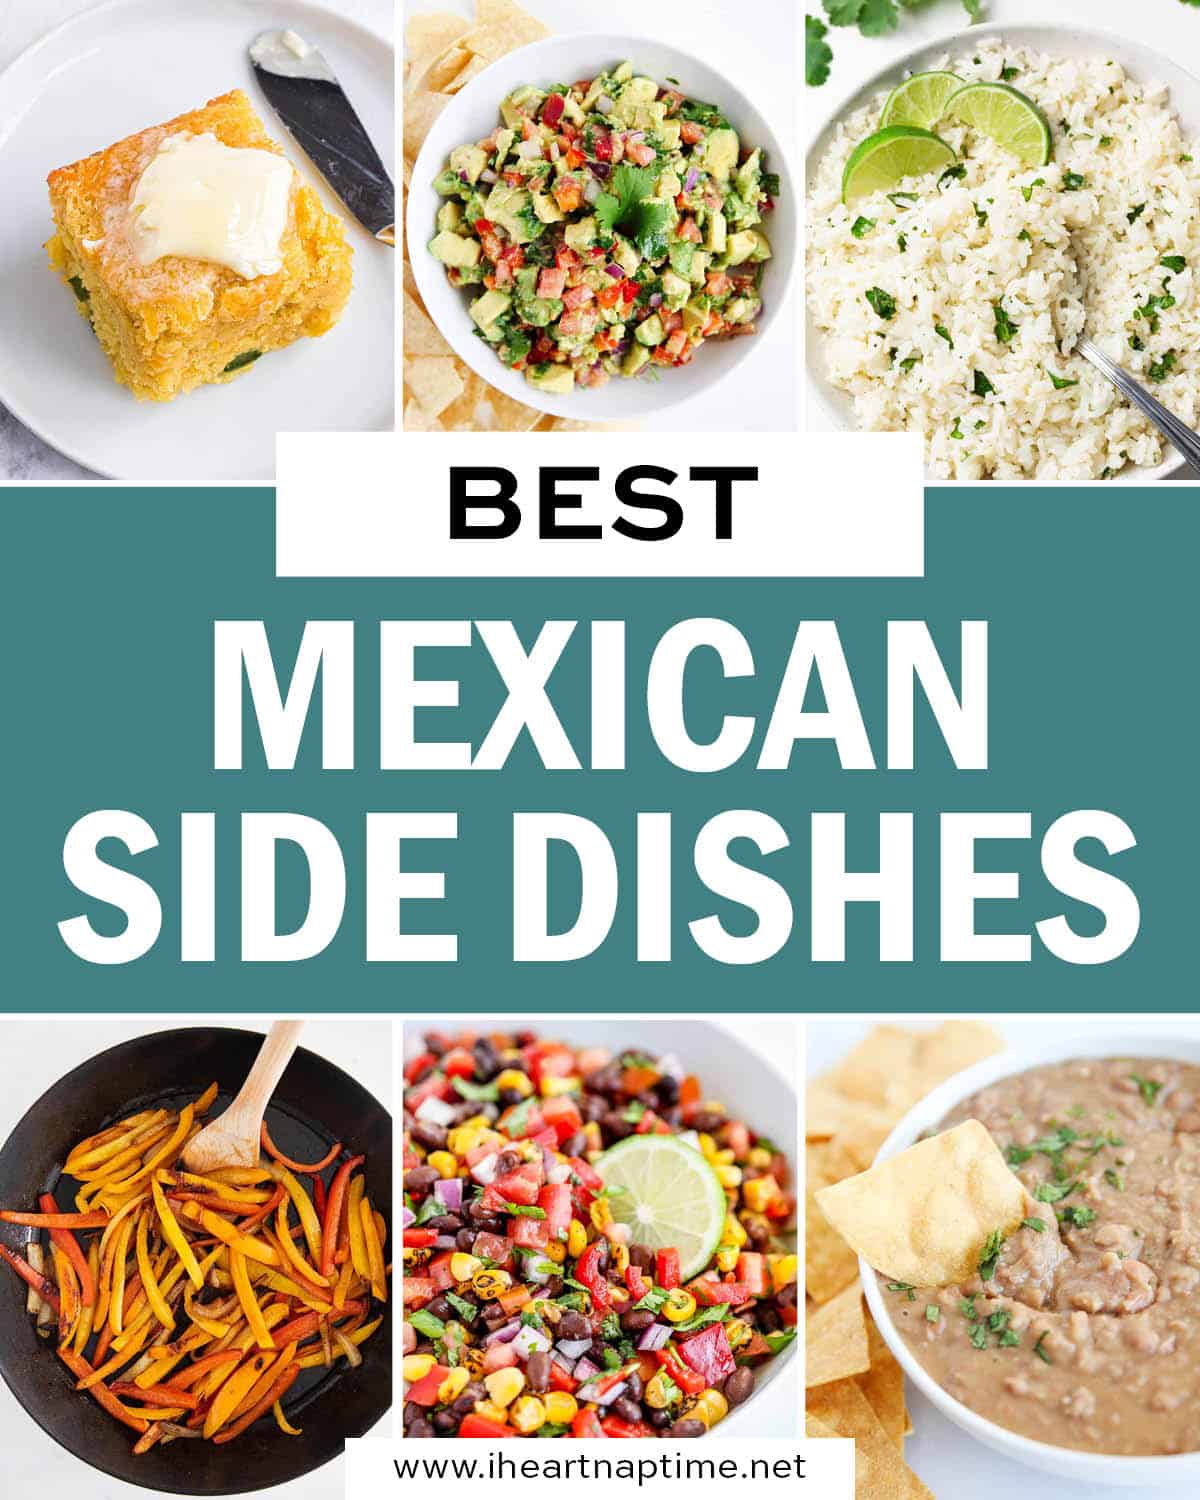 A collage of photos showing Mexican side dishes.